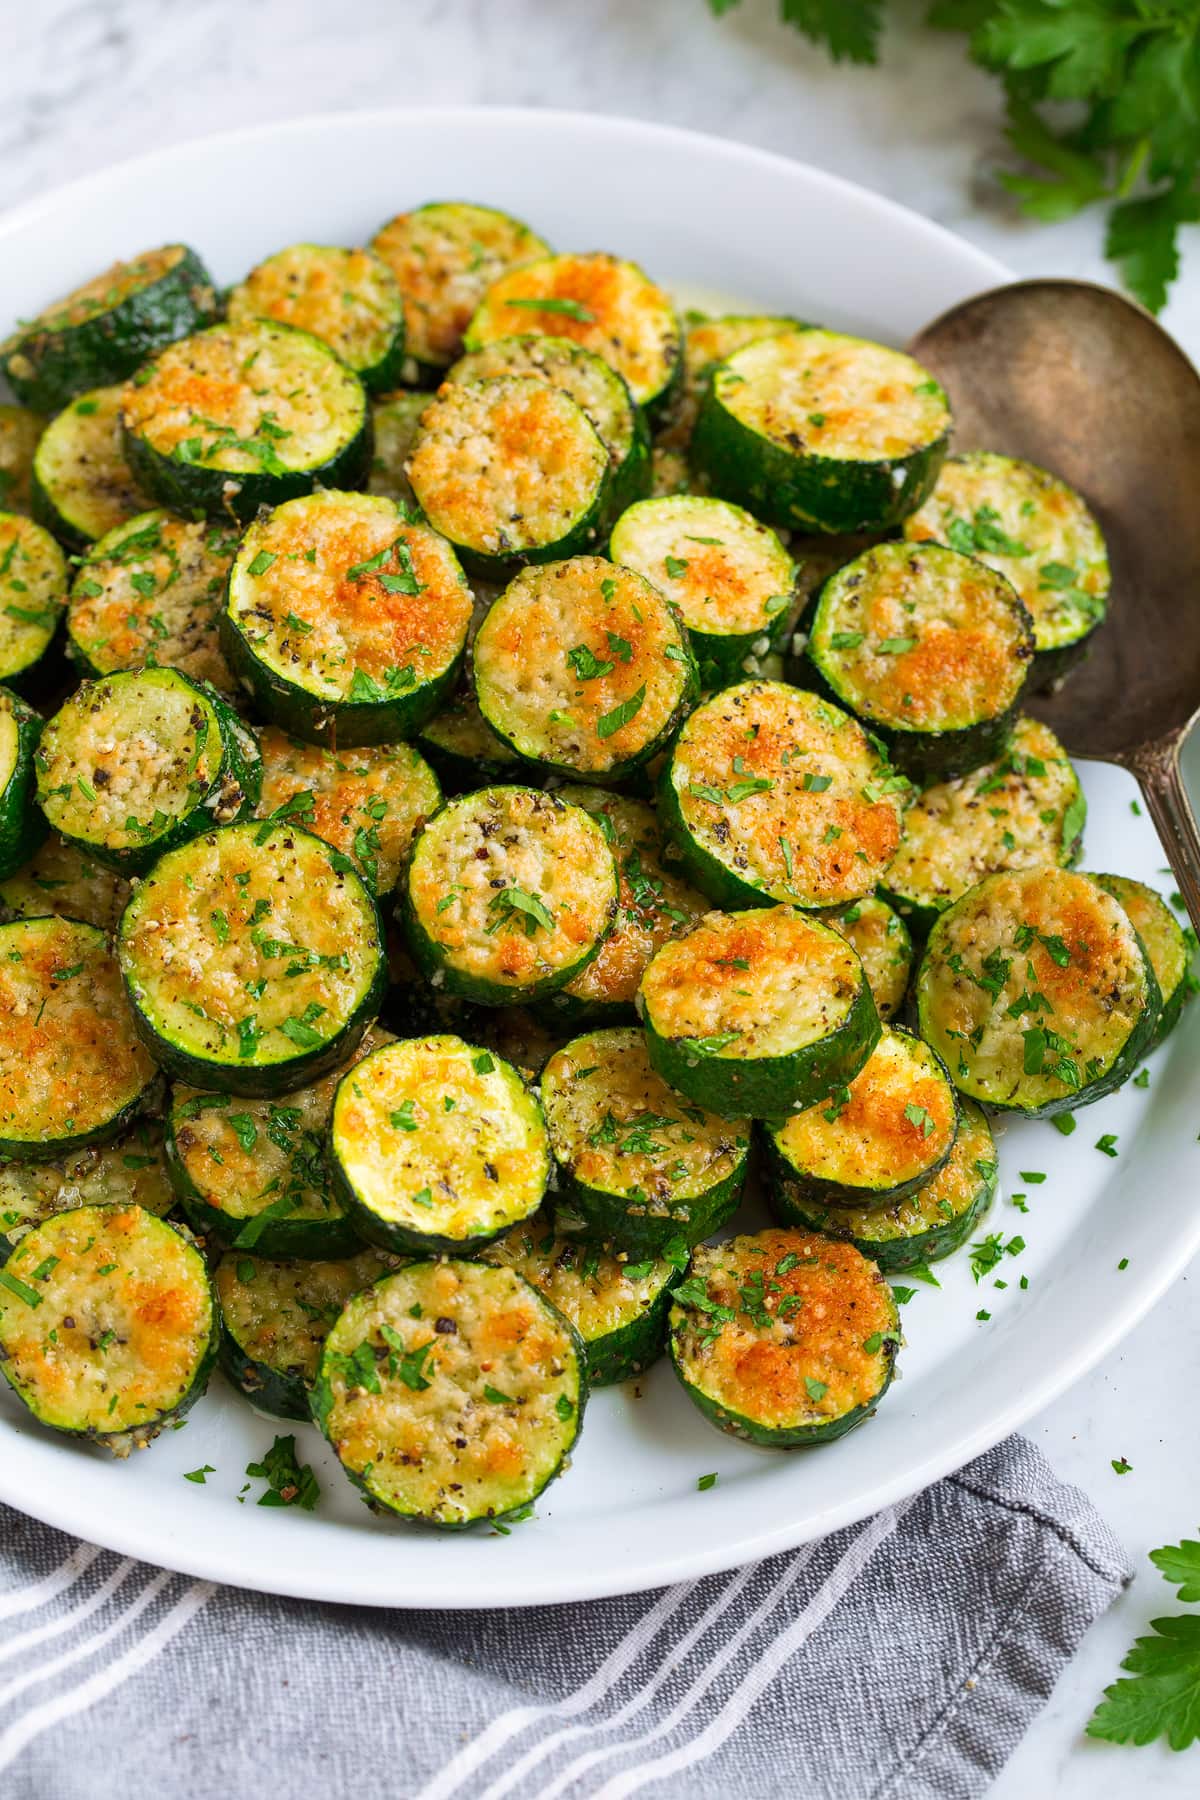 Baked zucchini shown in slices, from a side angle.